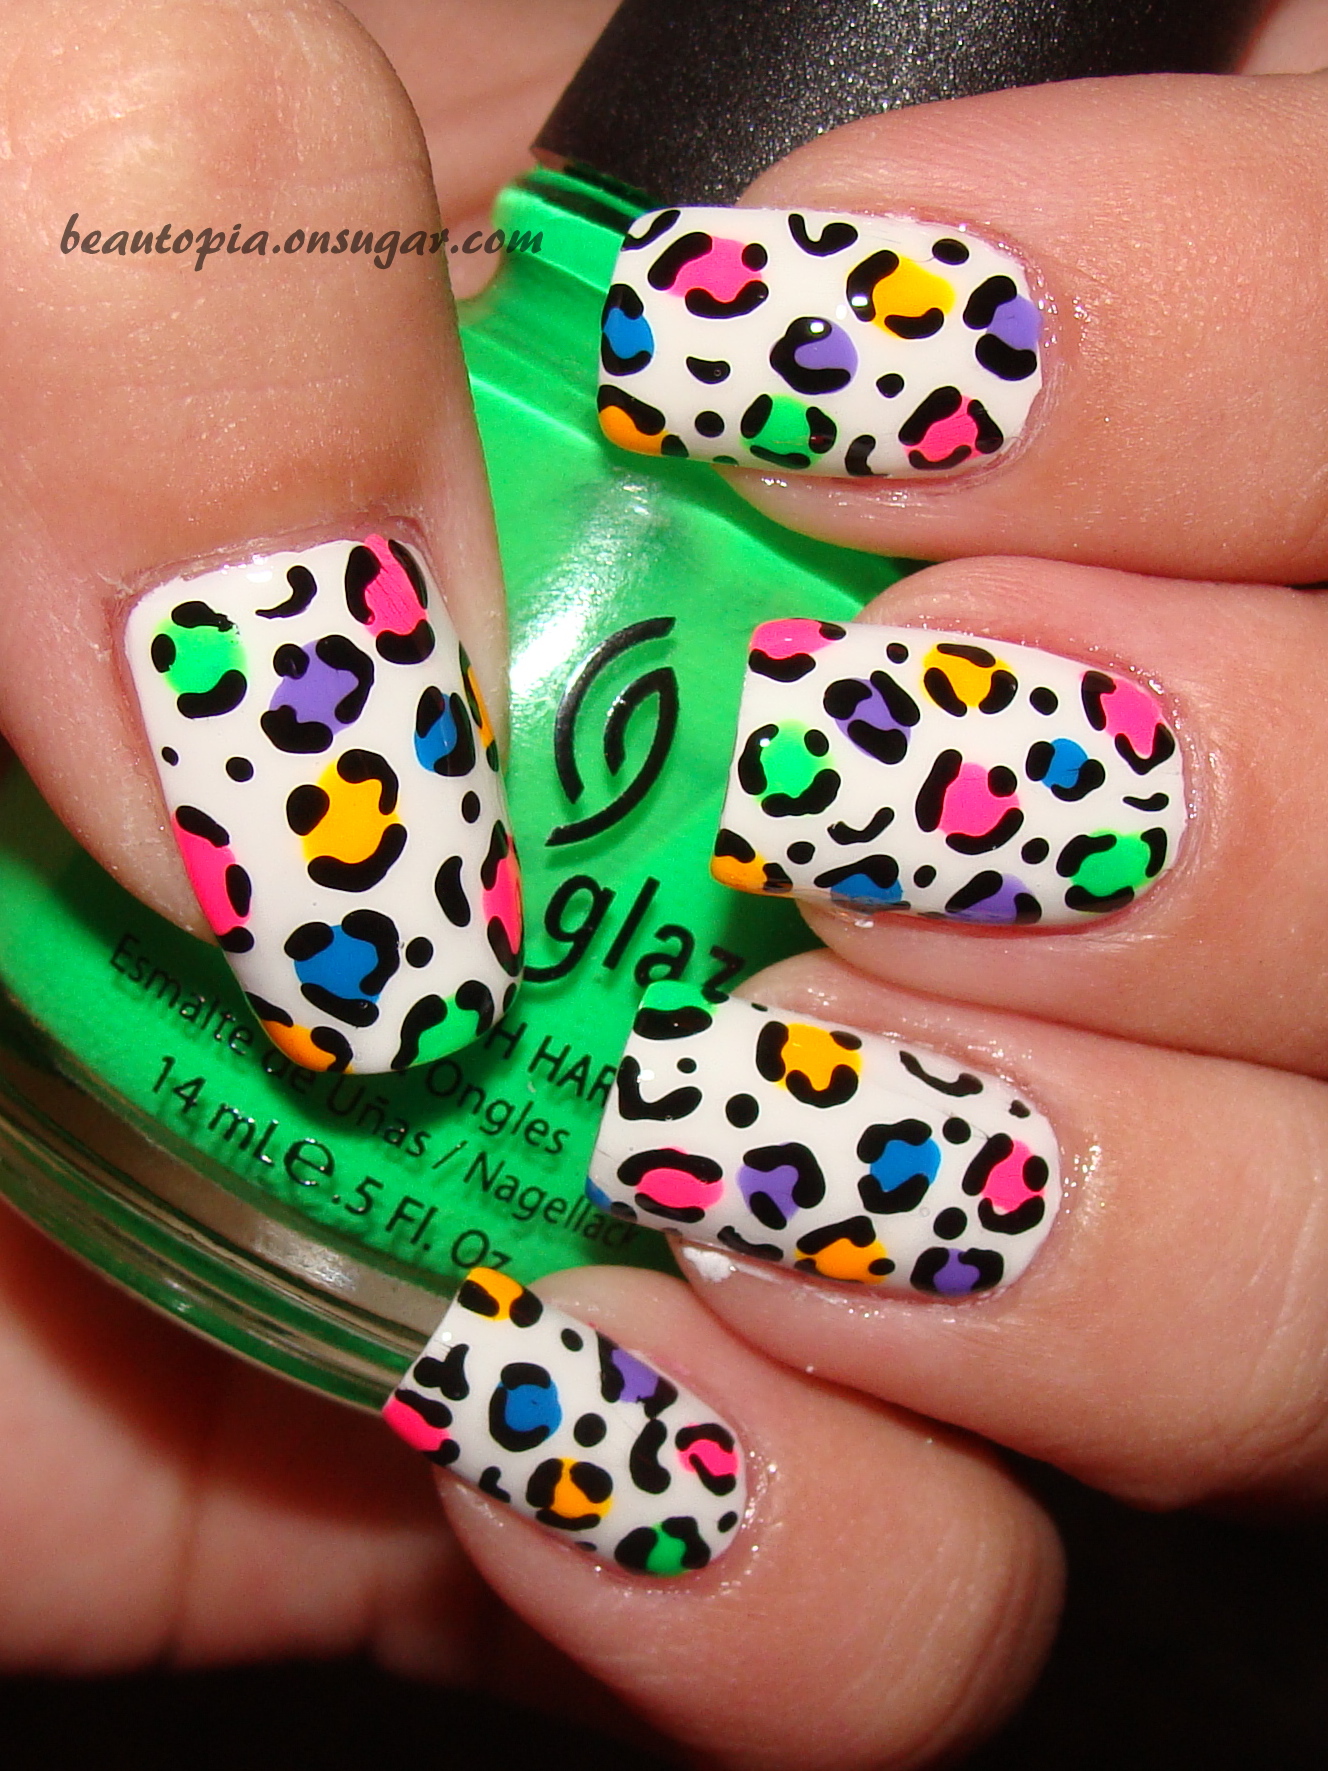 New and exciting innovative nail art products - One Quirky Blog